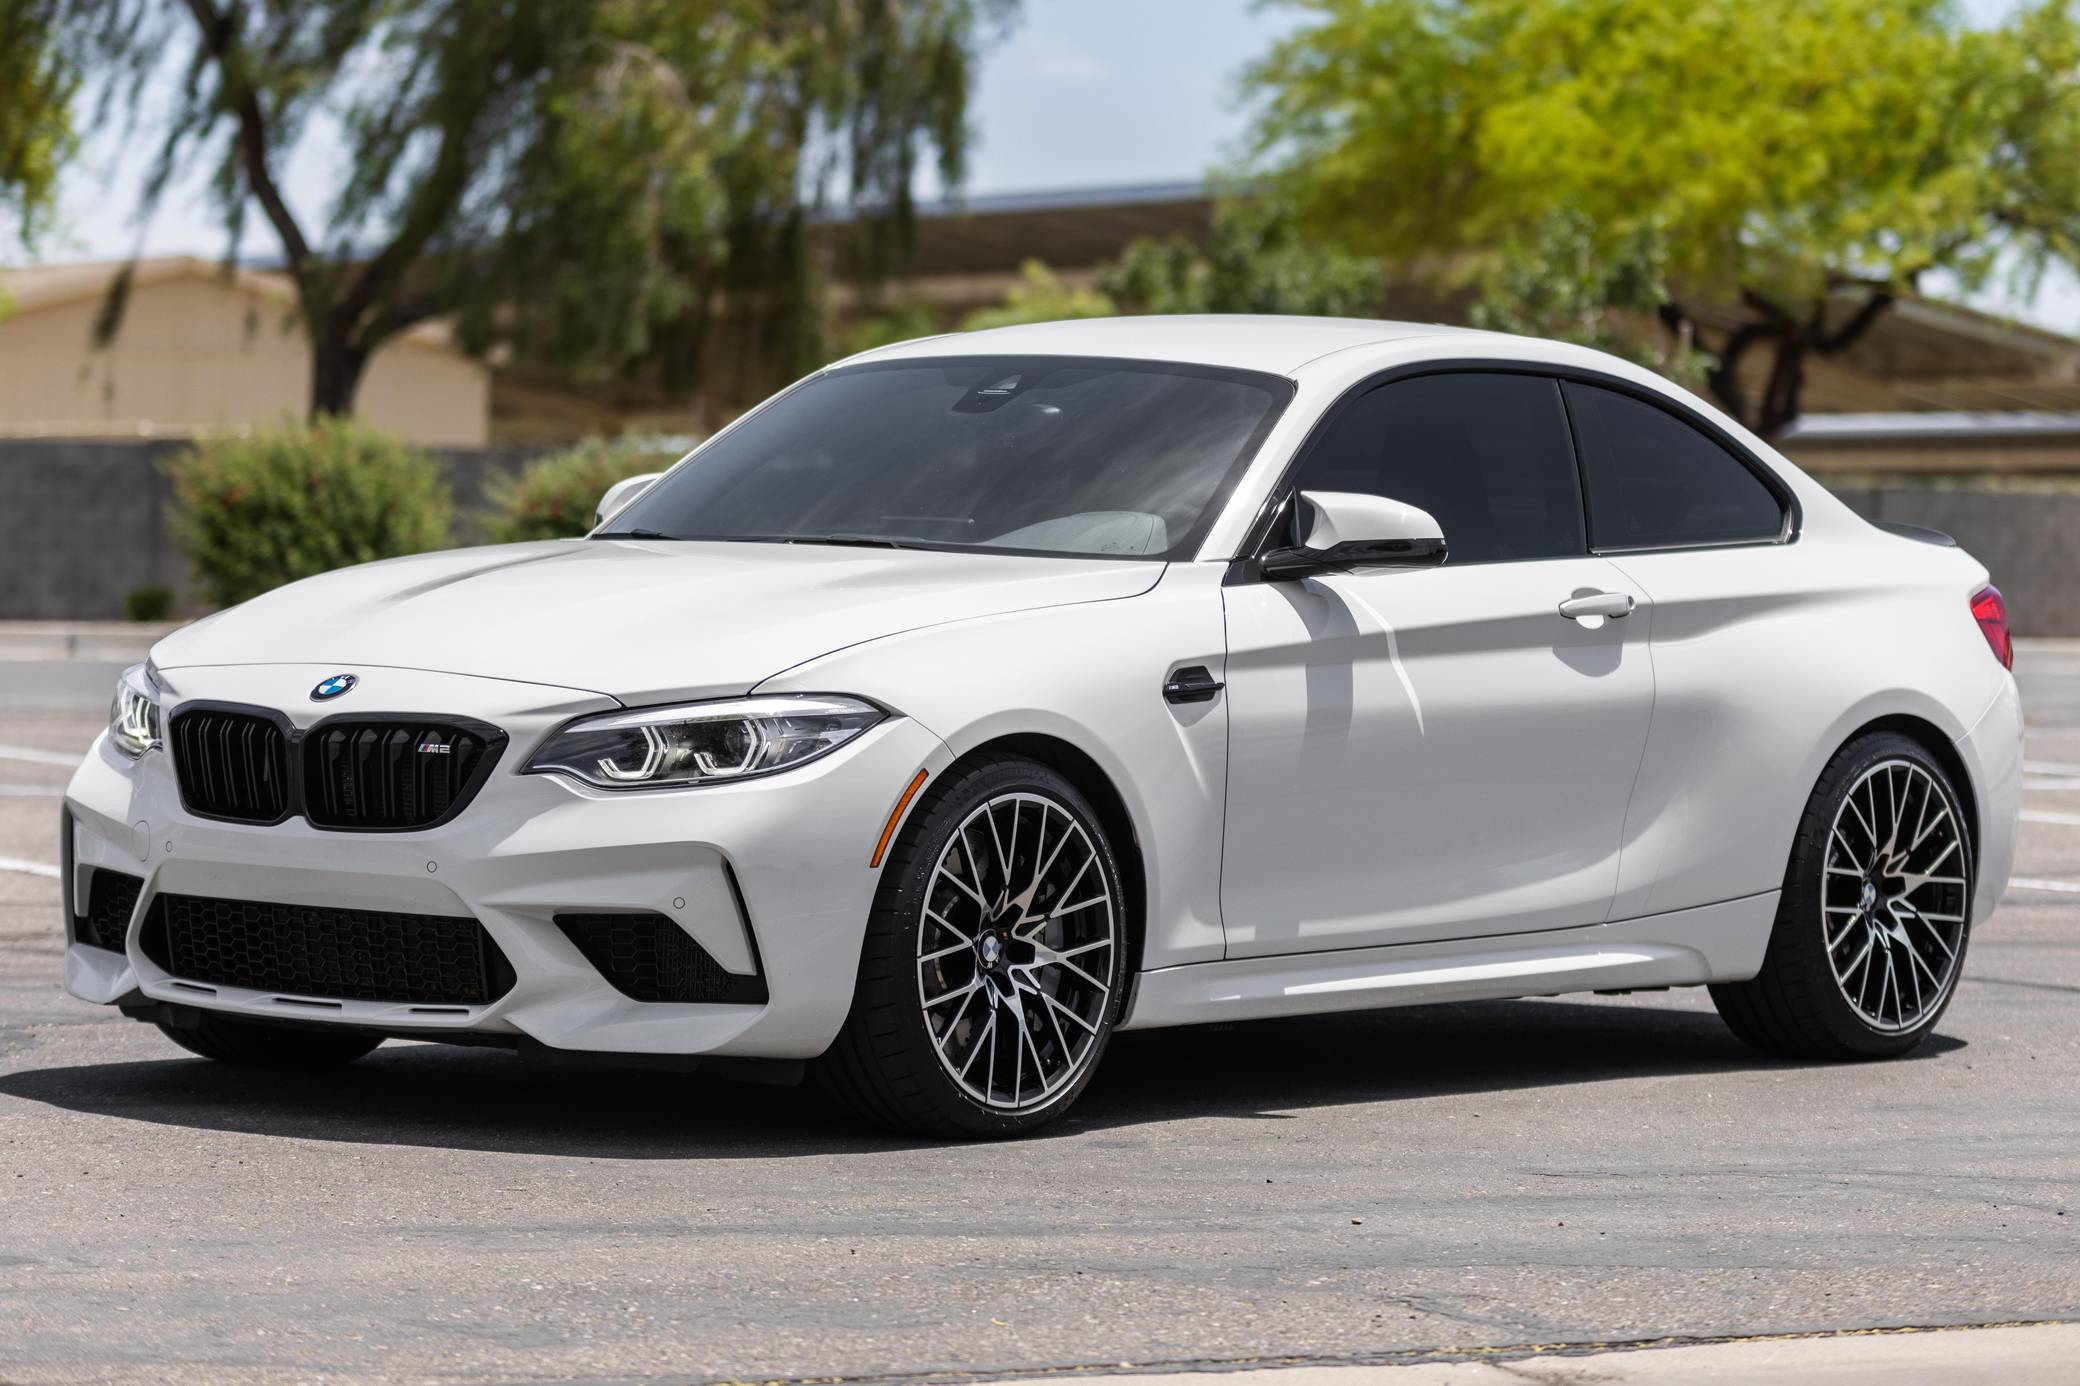 Real Life Photos: BMW M2 in Alpine White with M Performance Parts